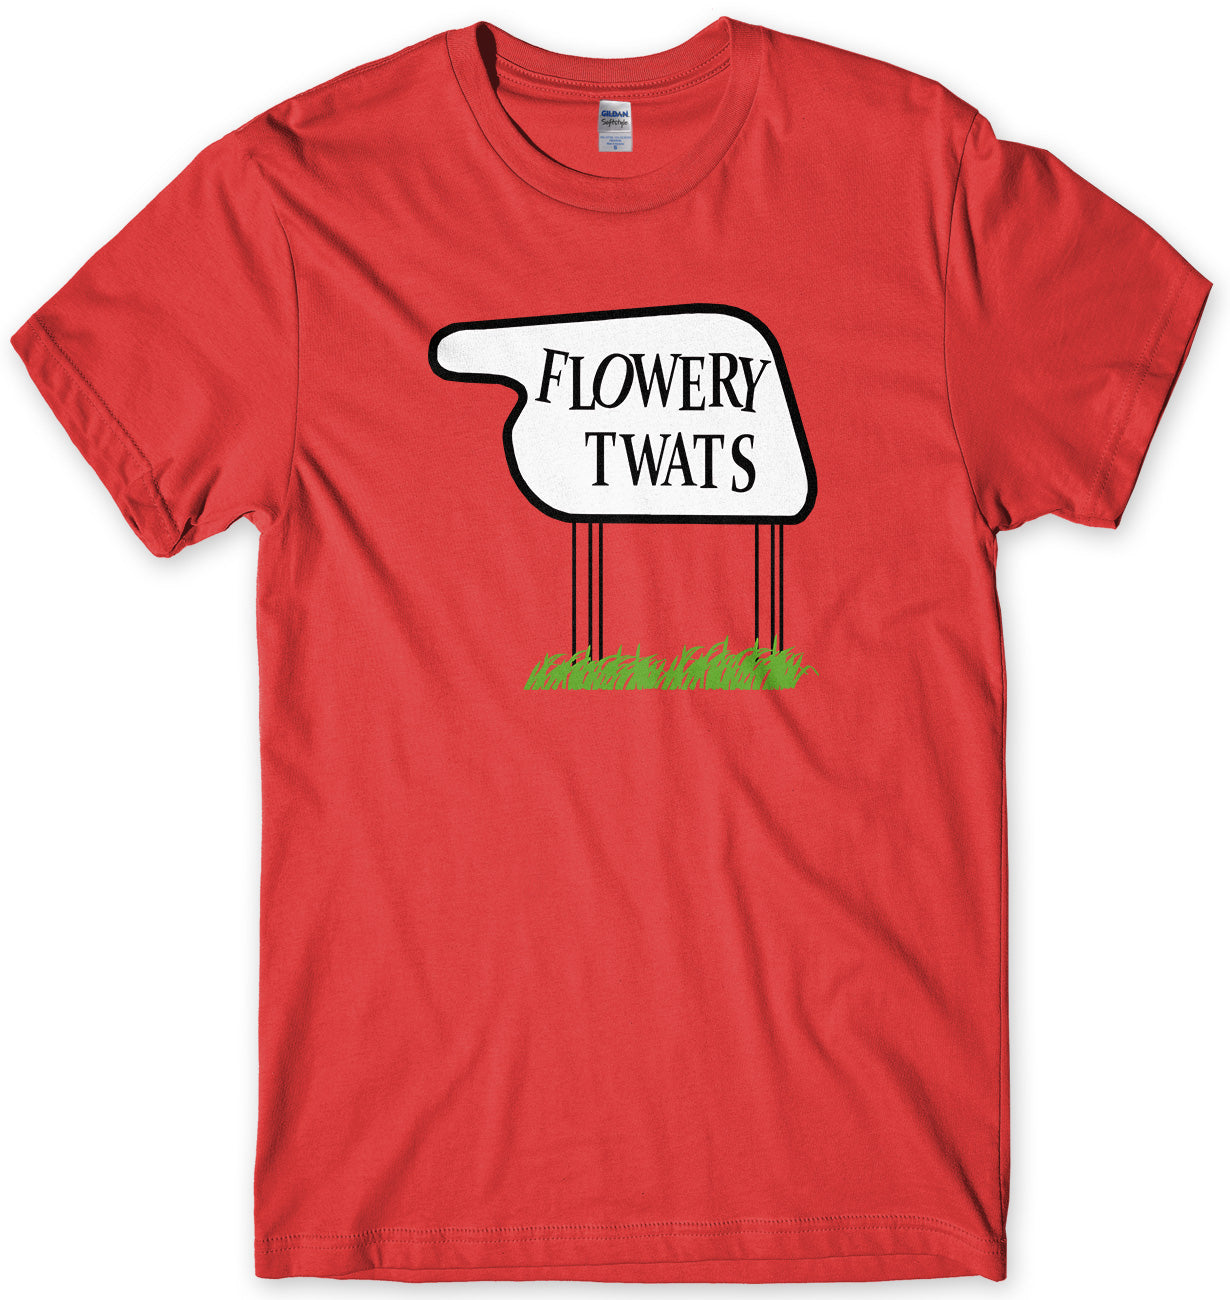 FLOWERY TWATS - INSPIRED BY FAULTY TOWERS MENS UNISEX T-SHIRT